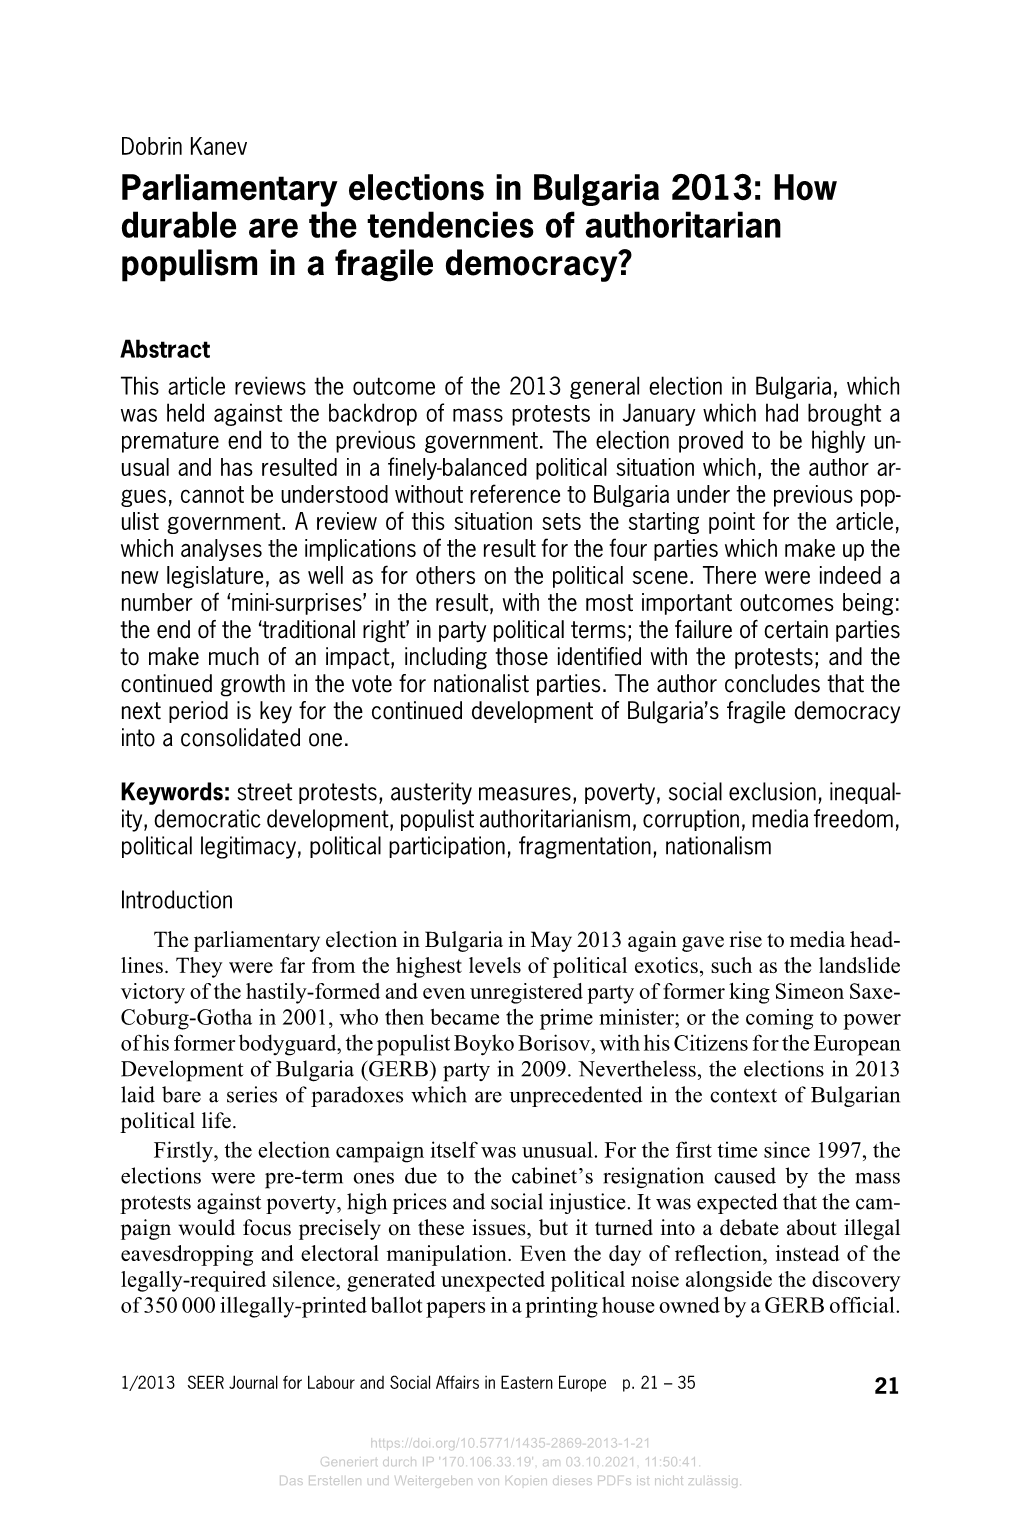 Parliamentary Elections in Bulgaria 2013: How Durable Are the Tendencies of Authoritarian Populism in a Fragile Democracy?